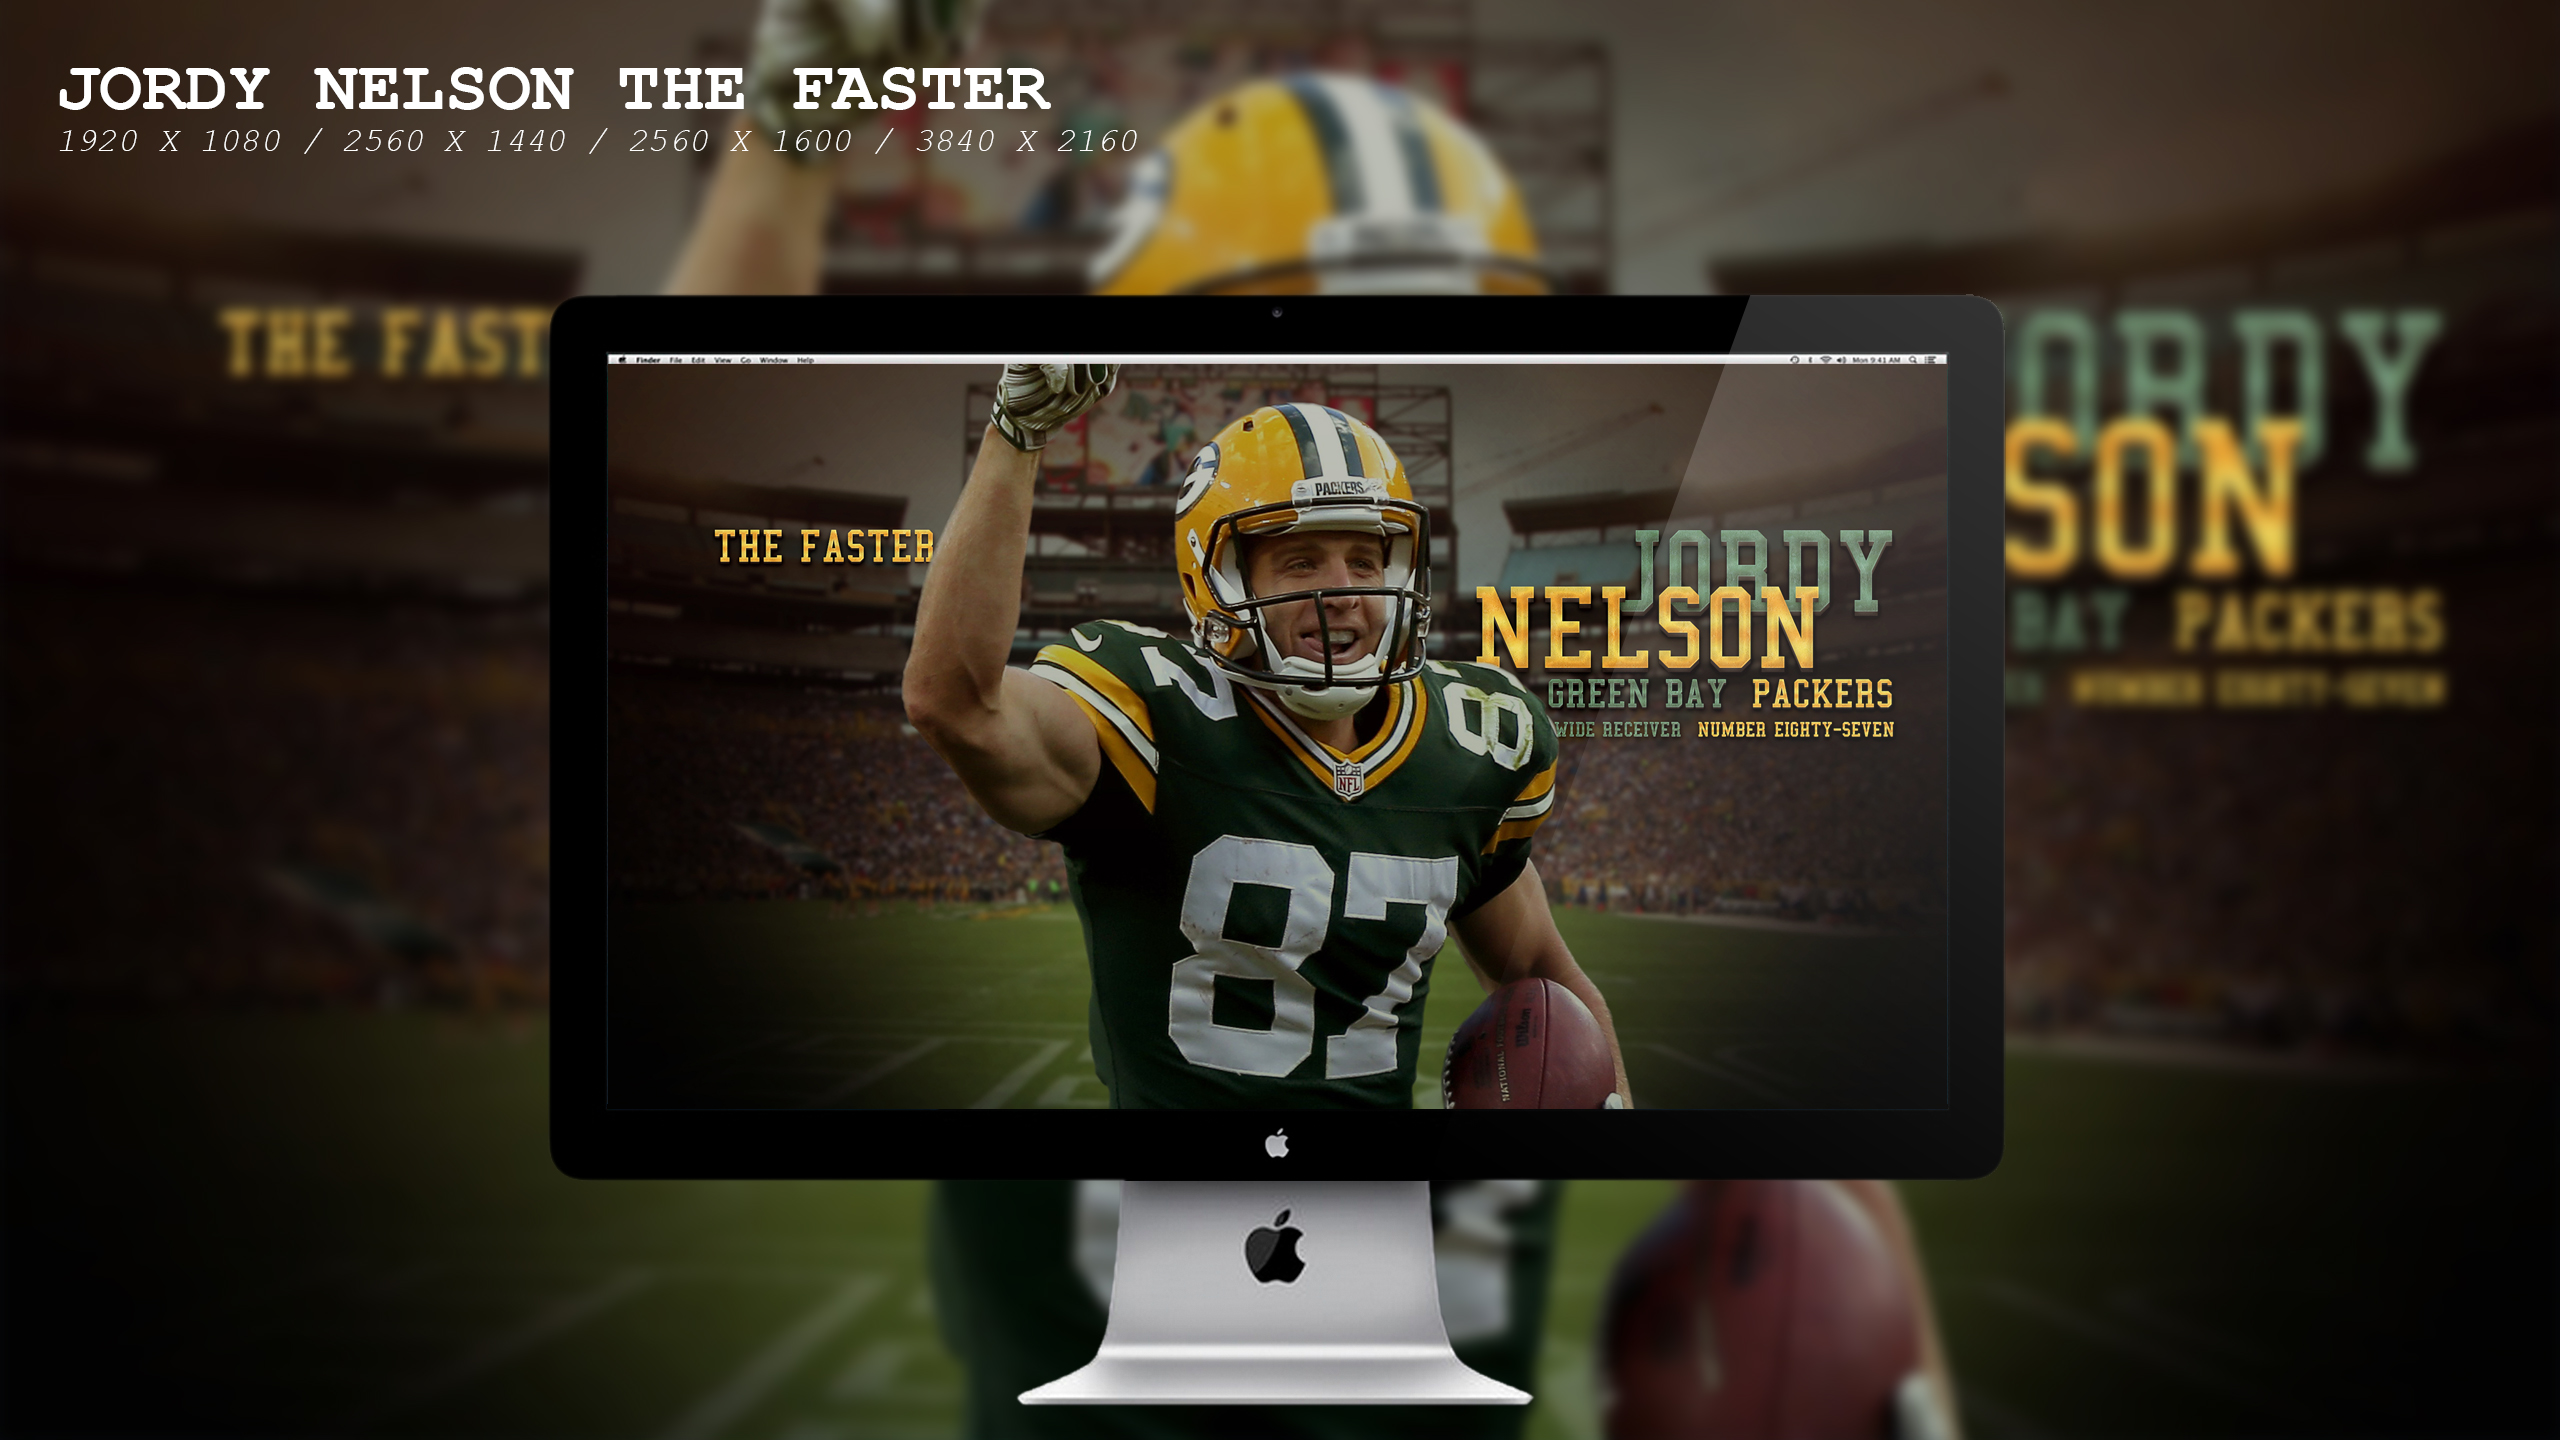 Jordy Nelson The Faster Wallpaper HD By Beaware8